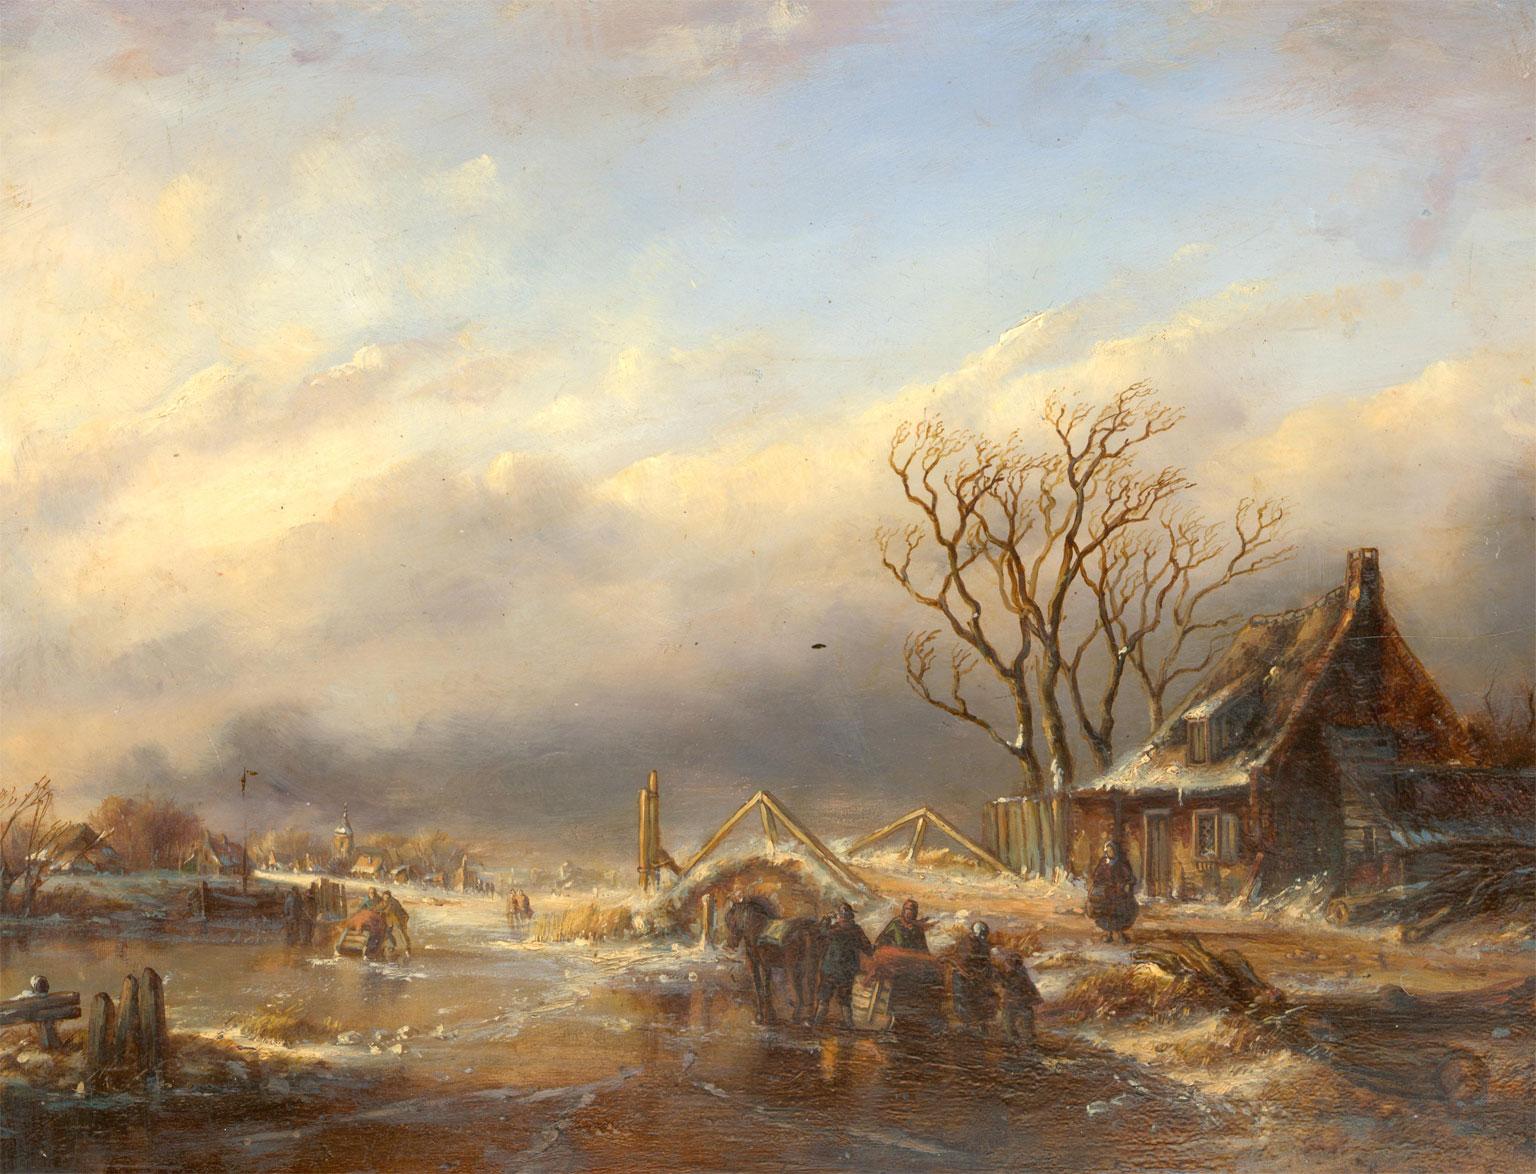 A very fine early 19th century oil depicting a Dutch winter landscape with a frozen lake and snow covered path. Figures gather around a horse and sled, balancing on the ice, while a small village can be picked out in the distance.

Known for their